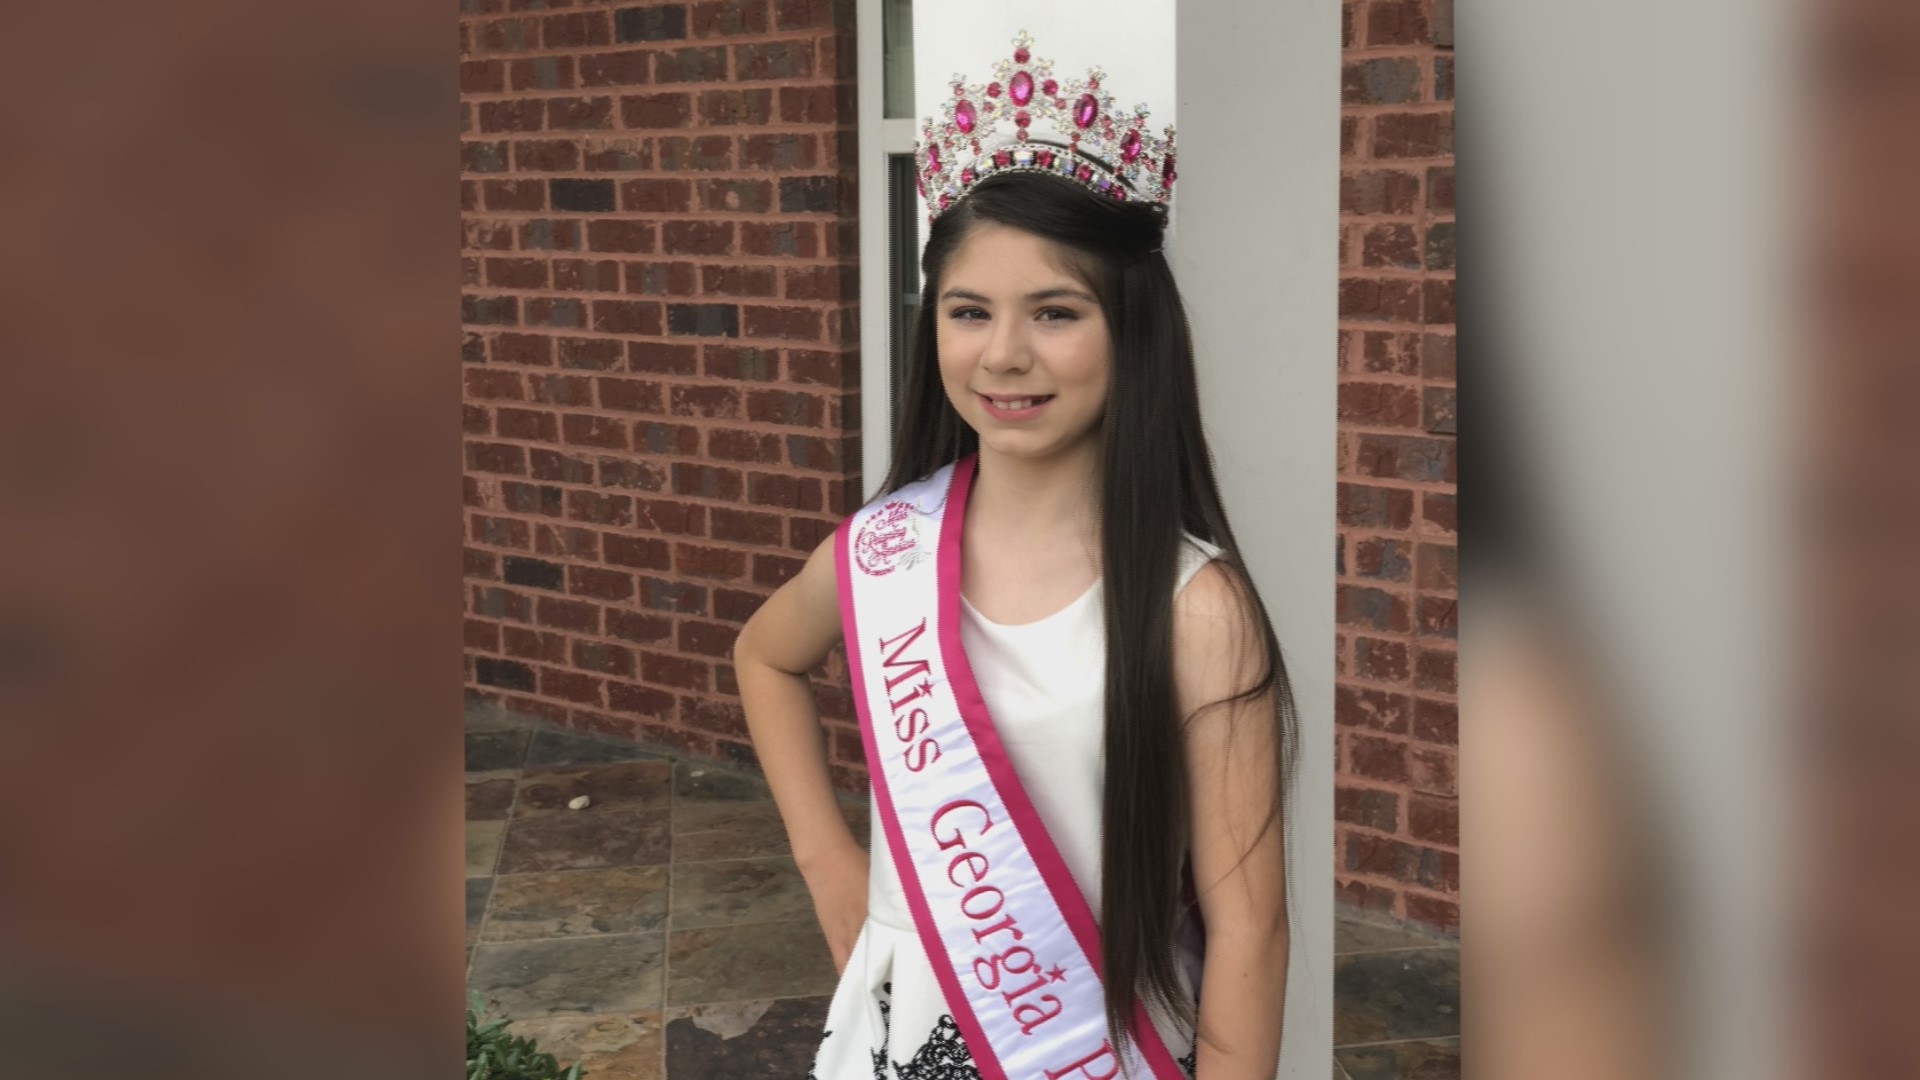 Sophia Cervantes is competing for the Miss Reigning America Pre-Teen title next weekend, after a former pageant director seemingly disappeared a year ago.